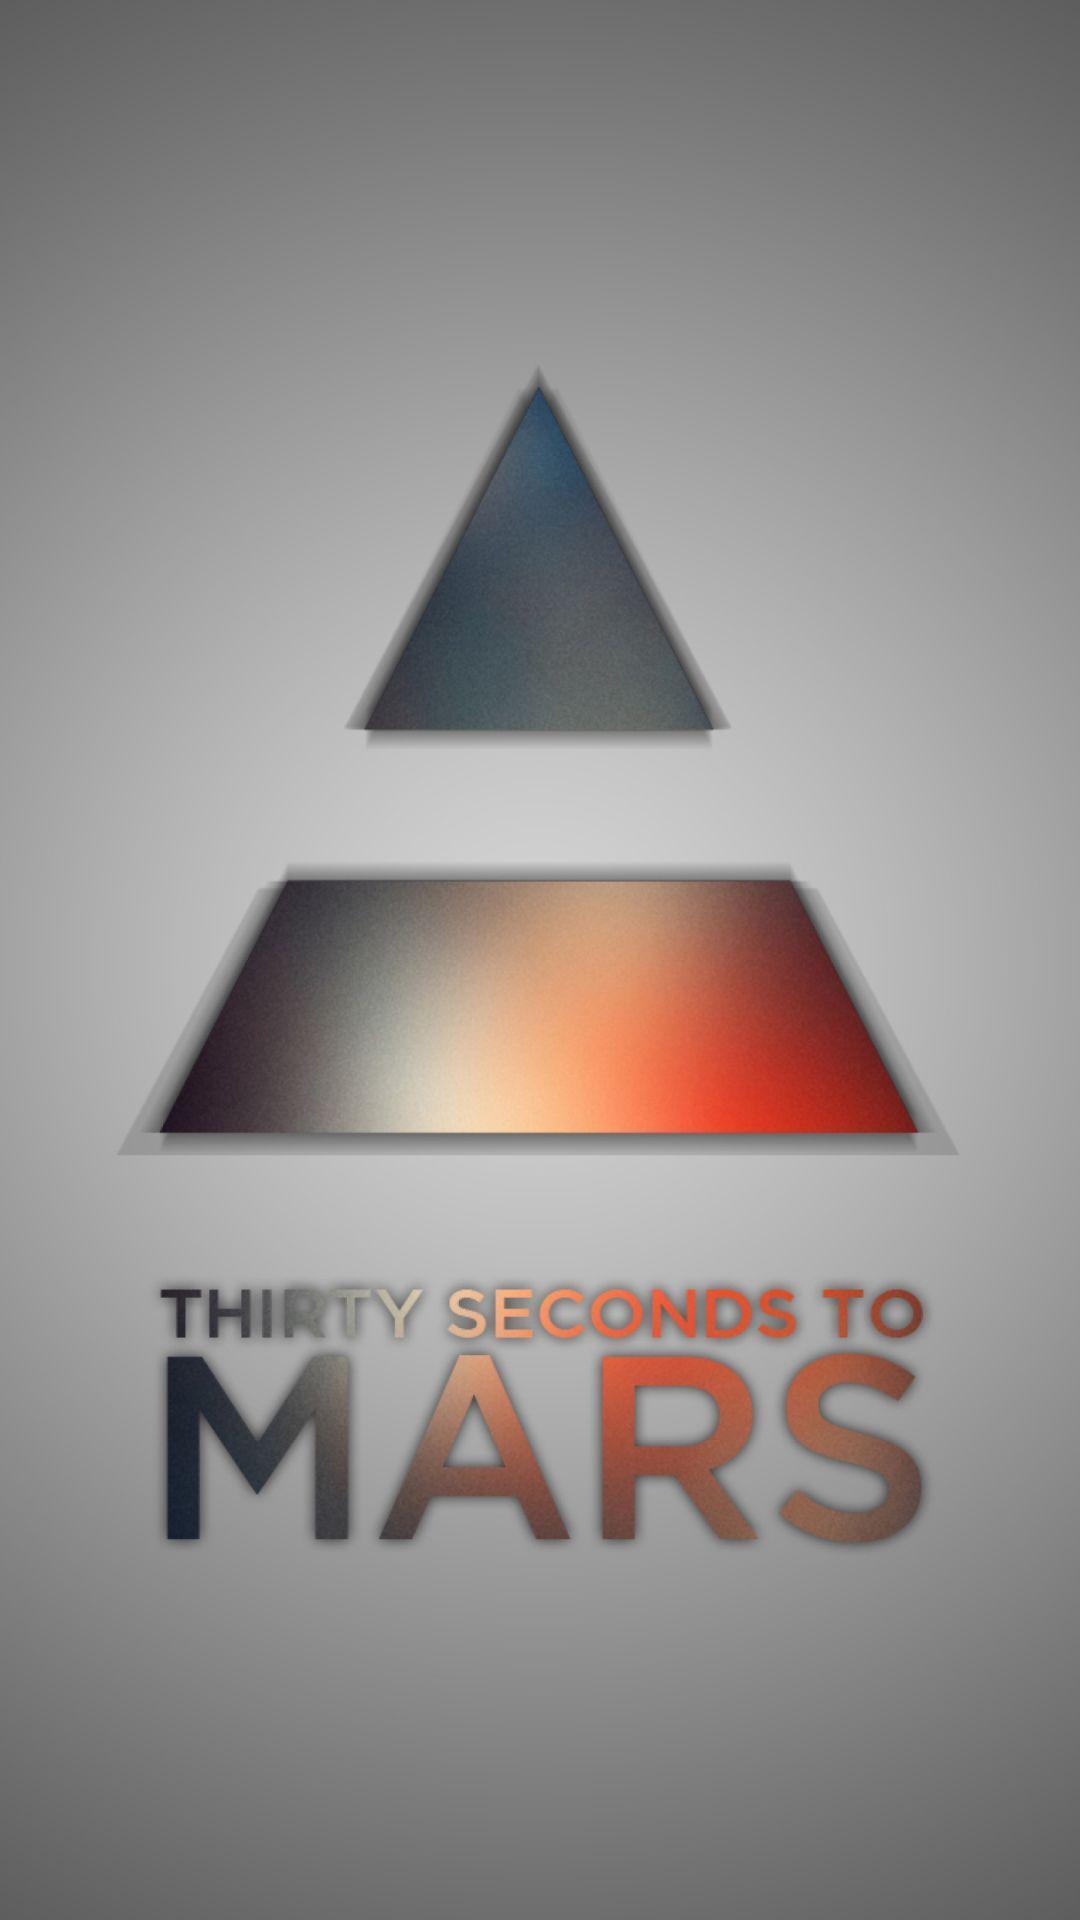 Seconds To Mars Wallpaper for iPhone iPhone 7 plus, iPhone